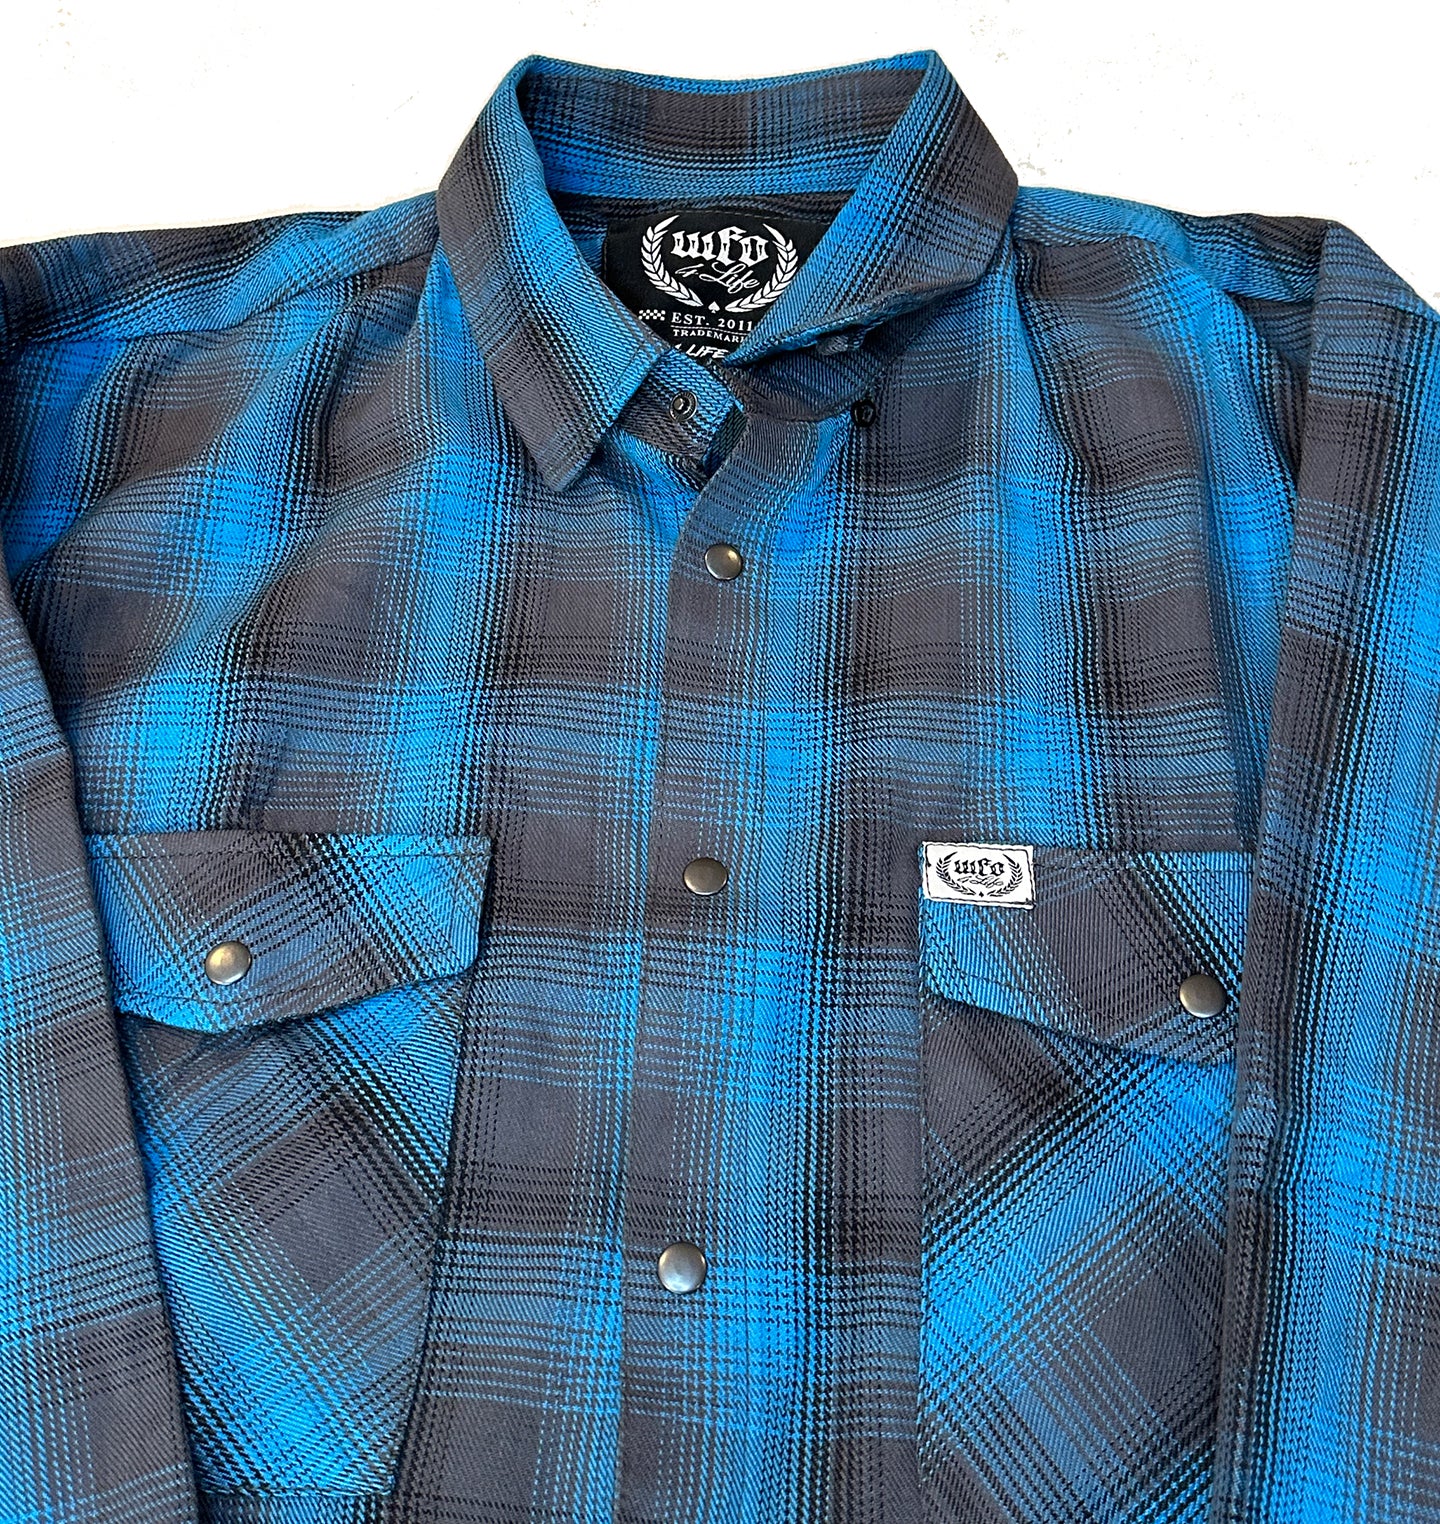 WFO 4 LIFE ™ - "Blue Notes" - HD Flannel